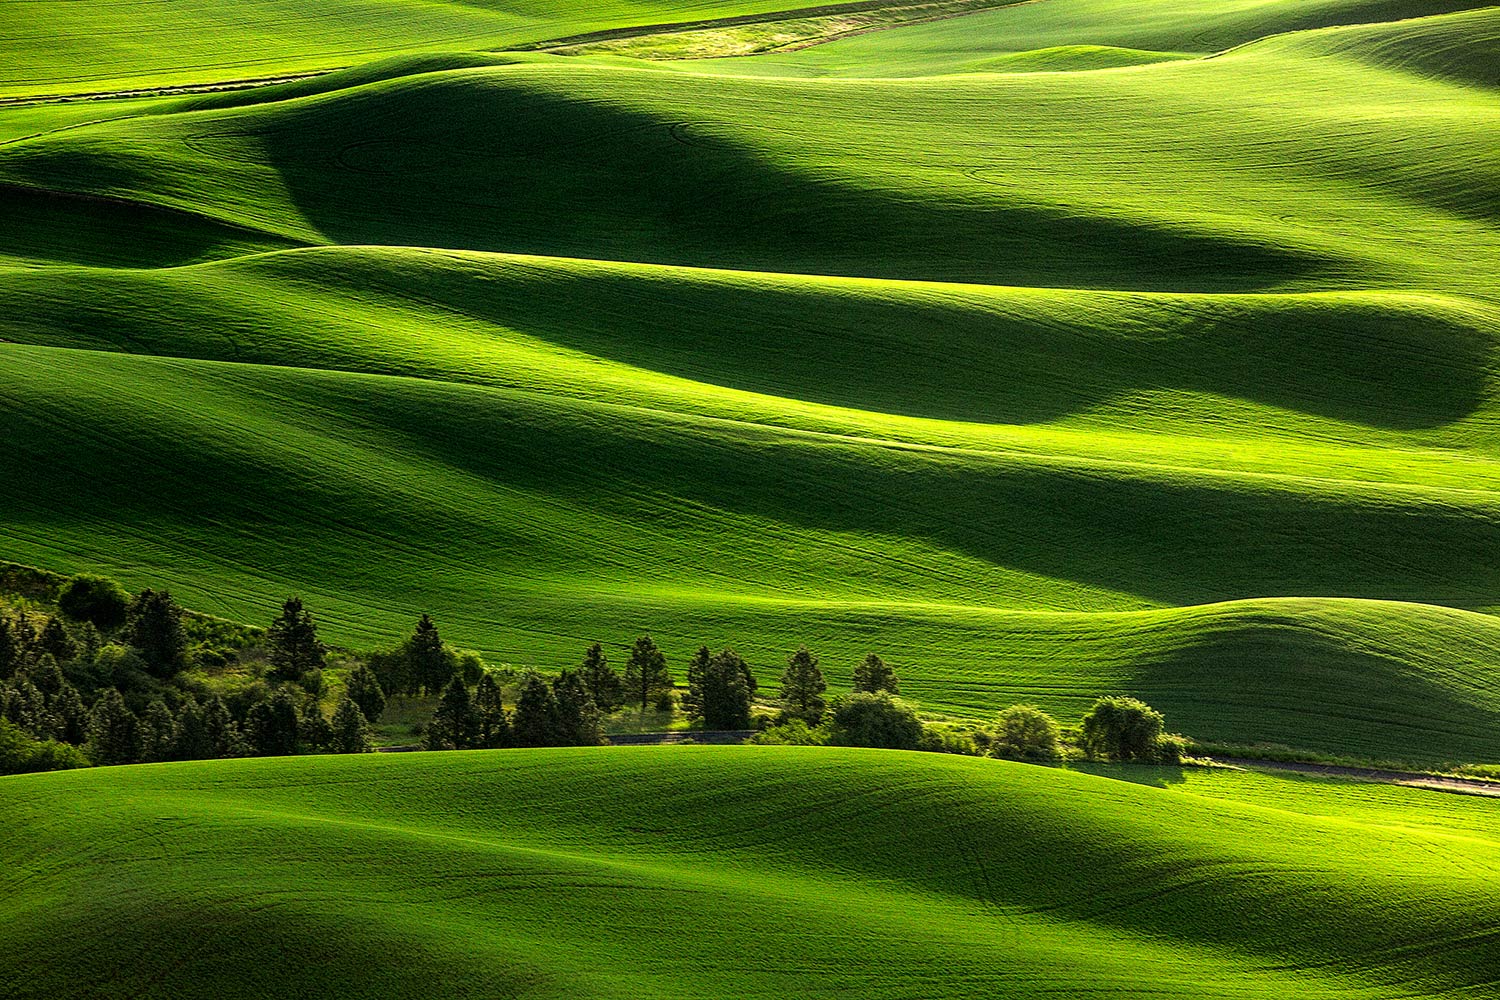 The view from Steptoe Butte looking east at Washington's beautiful rolling fields.&nbsp;→ Buy a Print&nbsp;